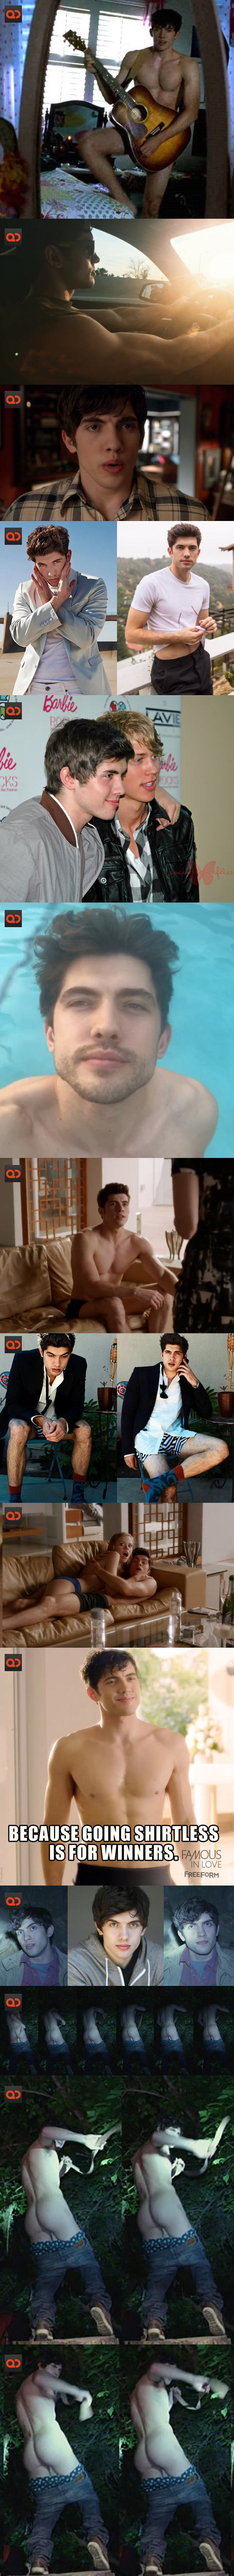 Carter Jenkins, American Actor From TV Series “Surface” And “Famous In Love”, Caught Jerking Off On Cam!